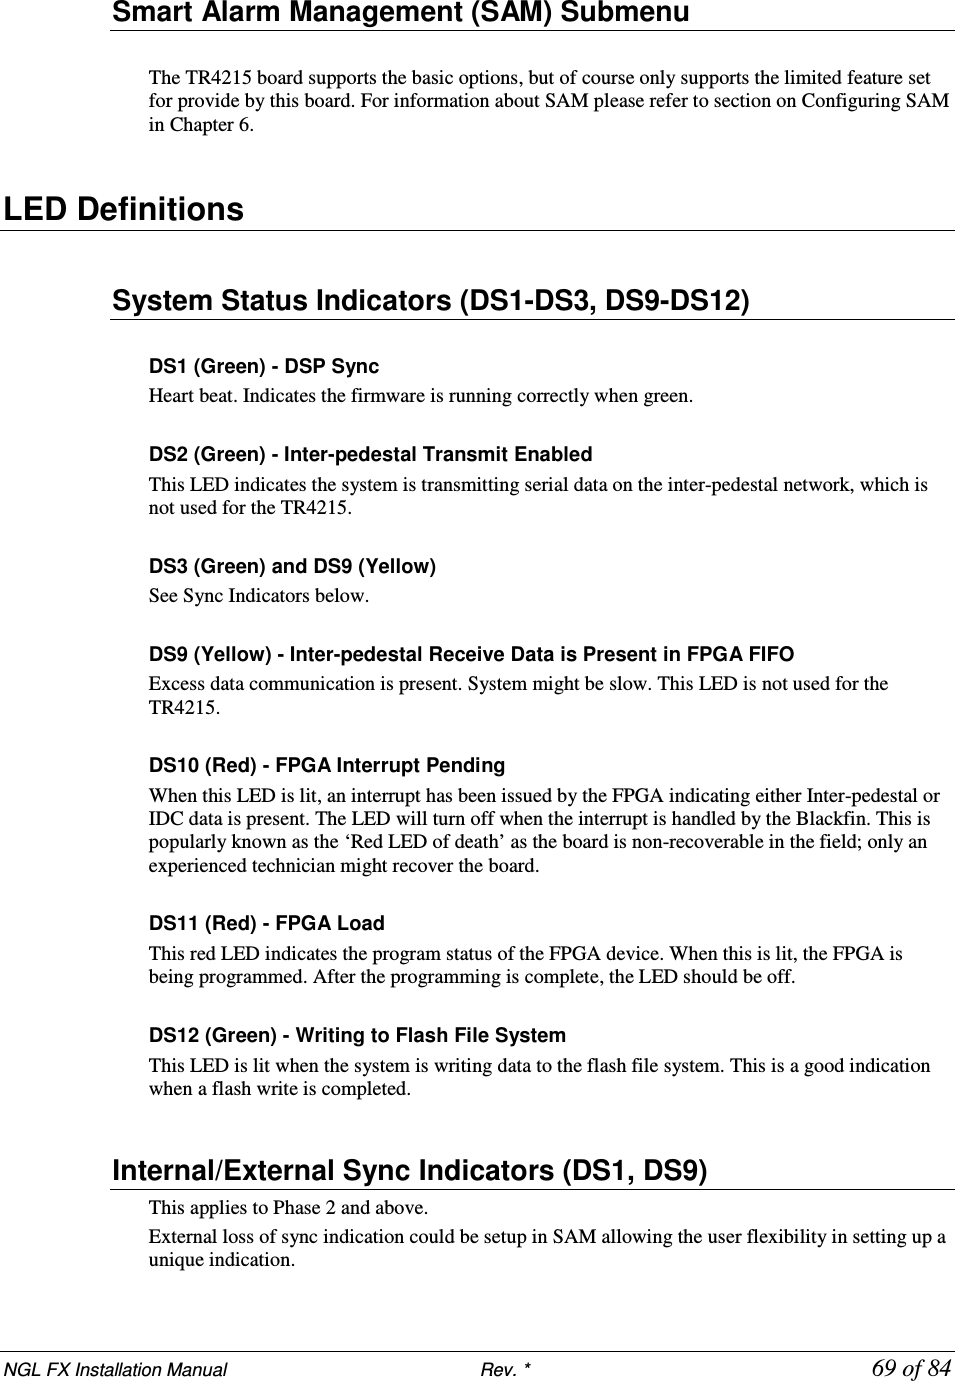 NGL FX Installation Manual                           Rev. *            69 of 84 Smart Alarm Management (SAM) Submenu  The TR4215 board supports the basic options, but of course only supports the limited feature set for provide by this board. For information about SAM please refer to section on Configuring SAM in Chapter 6.  LED Definitions   System Status Indicators (DS1-DS3, DS9-DS12)  DS1 (Green) - DSP Sync Heart beat. Indicates the firmware is running correctly when green.  DS2 (Green) - Inter-pedestal Transmit Enabled This LED indicates the system is transmitting serial data on the inter-pedestal network, which is not used for the TR4215.  DS3 (Green) and DS9 (Yellow) See Sync Indicators below.  DS9 (Yellow) - Inter-pedestal Receive Data is Present in FPGA FIFO Excess data communication is present. System might be slow. This LED is not used for the TR4215.  DS10 (Red) - FPGA Interrupt Pending When this LED is lit, an interrupt has been issued by the FPGA indicating either Inter-pedestal or IDC data is present. The LED will turn off when the interrupt is handled by the Blackfin. This is popularly known as the ‘Red LED of death’ as the board is non-recoverable in the field; only an experienced technician might recover the board.  DS11 (Red) - FPGA Load This red LED indicates the program status of the FPGA device. When this is lit, the FPGA is being programmed. After the programming is complete, the LED should be off.  DS12 (Green) - Writing to Flash File System This LED is lit when the system is writing data to the flash file system. This is a good indication when a flash write is completed.  Internal/External Sync Indicators (DS1, DS9) This applies to Phase 2 and above.  External loss of sync indication could be setup in SAM allowing the user flexibility in setting up a unique indication. 